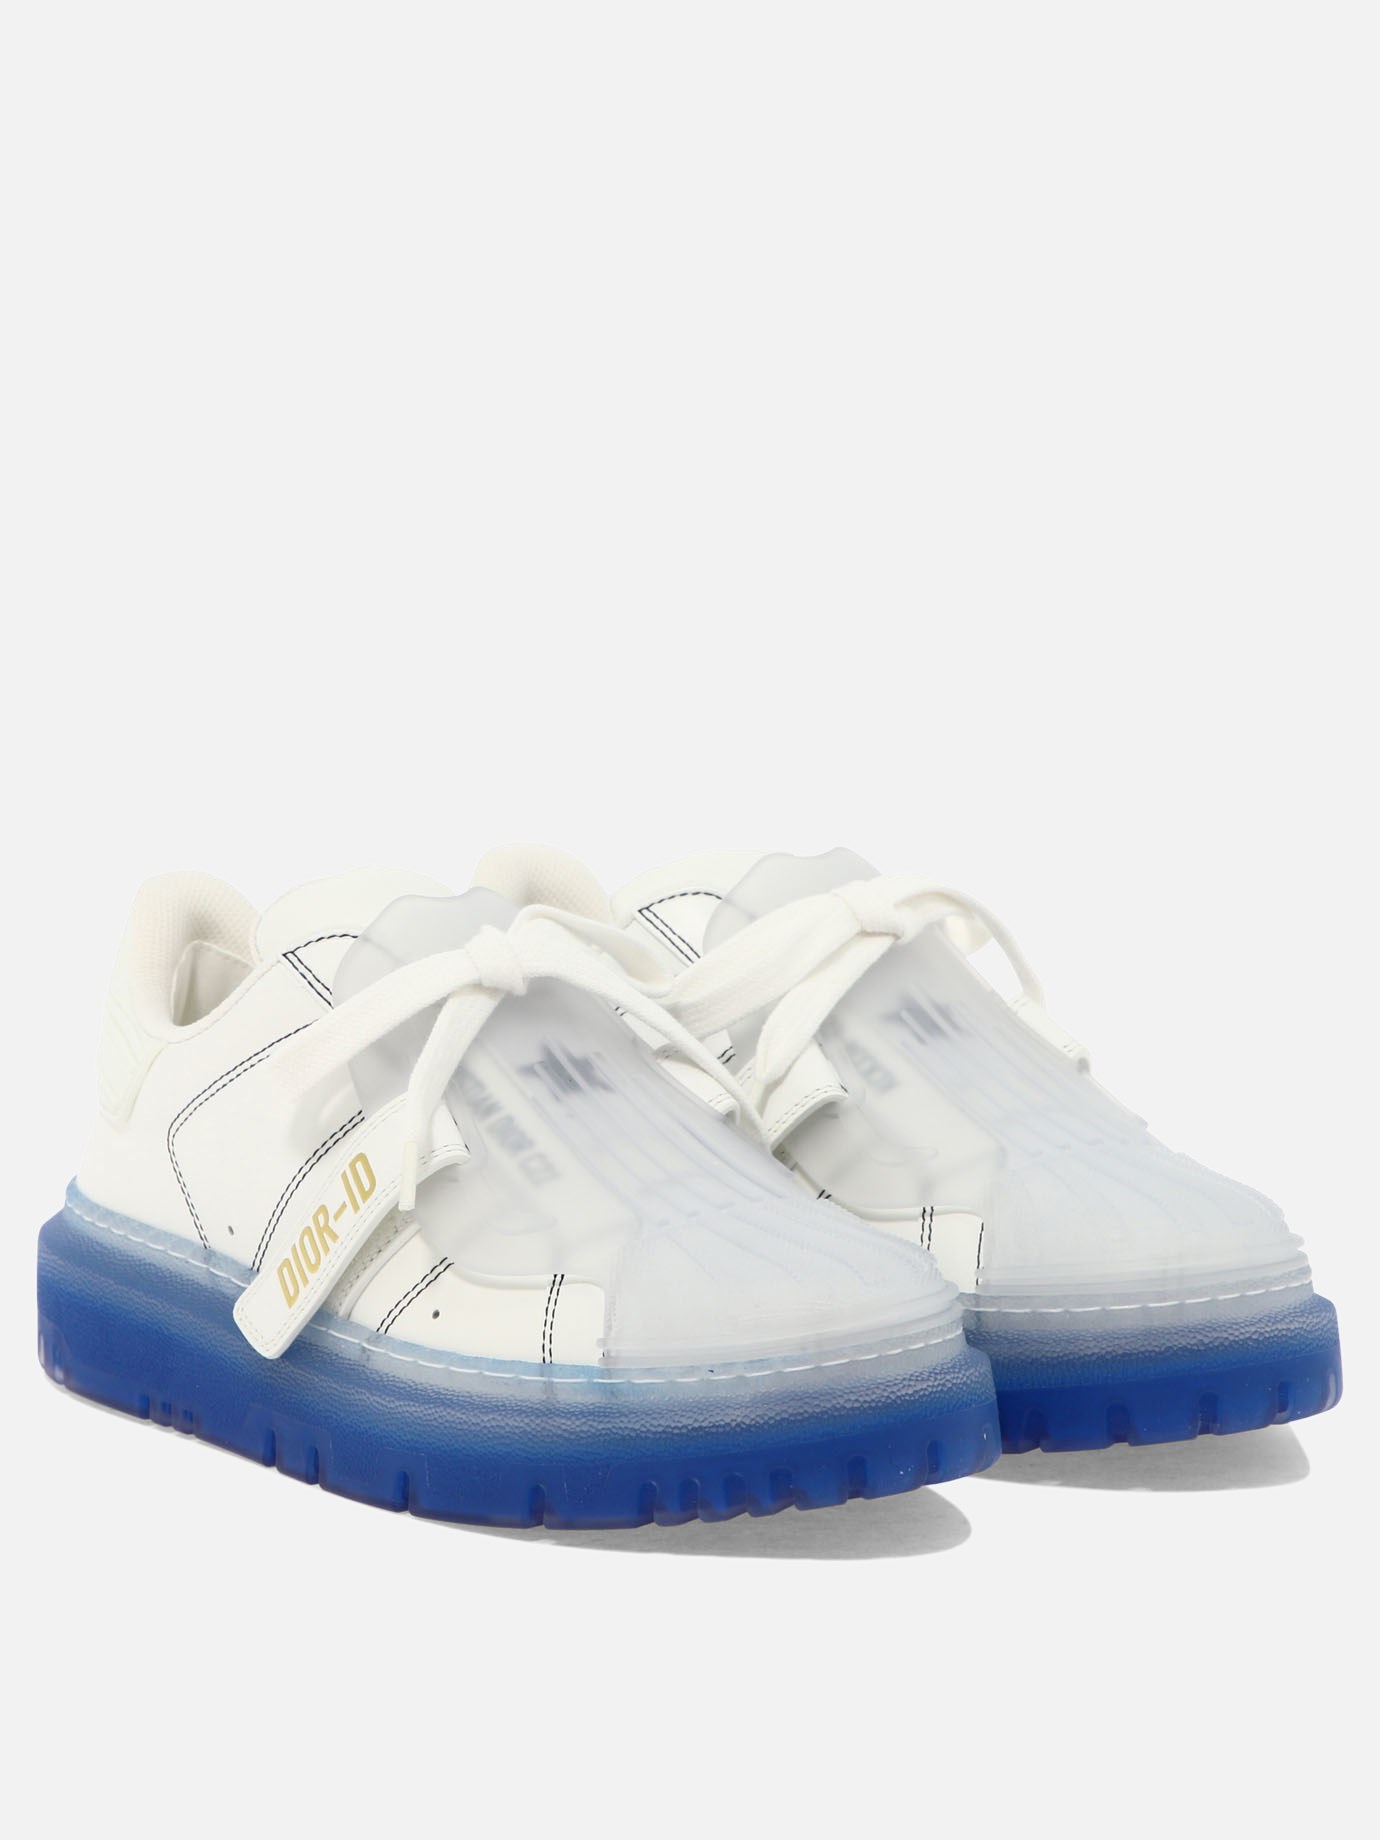 Sneaker  Dior-Id  by Dior